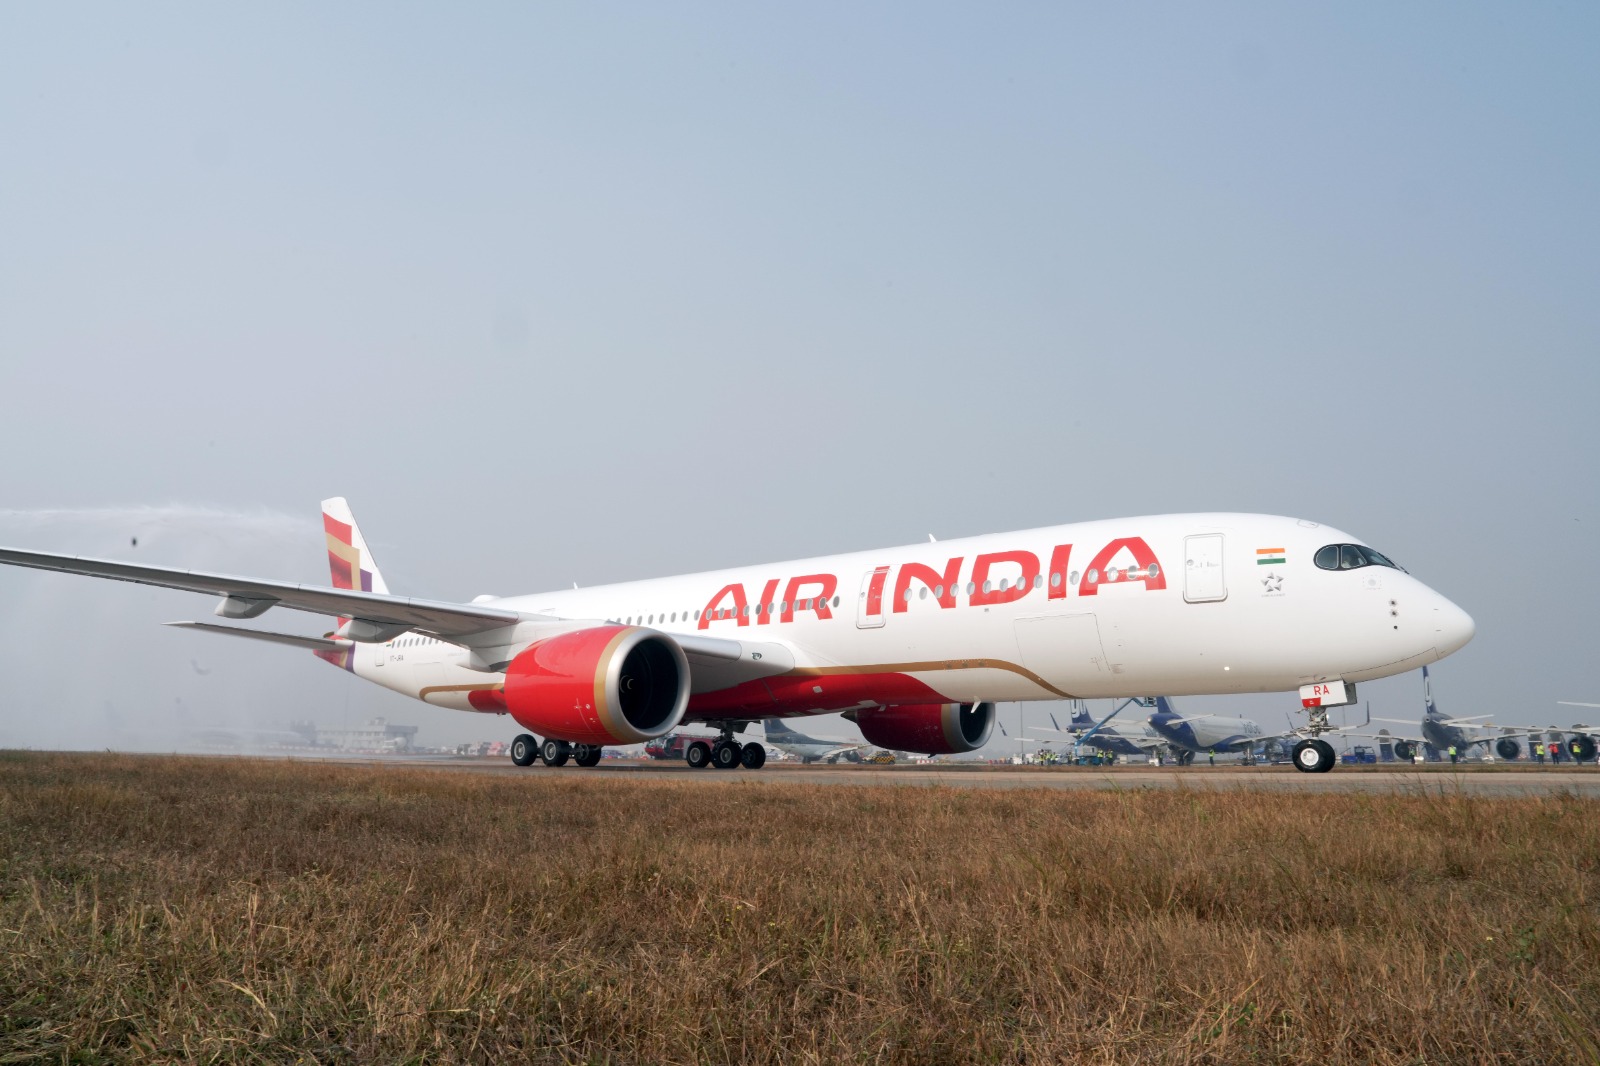 Air India to deploy A350-900 aircraft on Delhi-Heathrow route from Sept 1